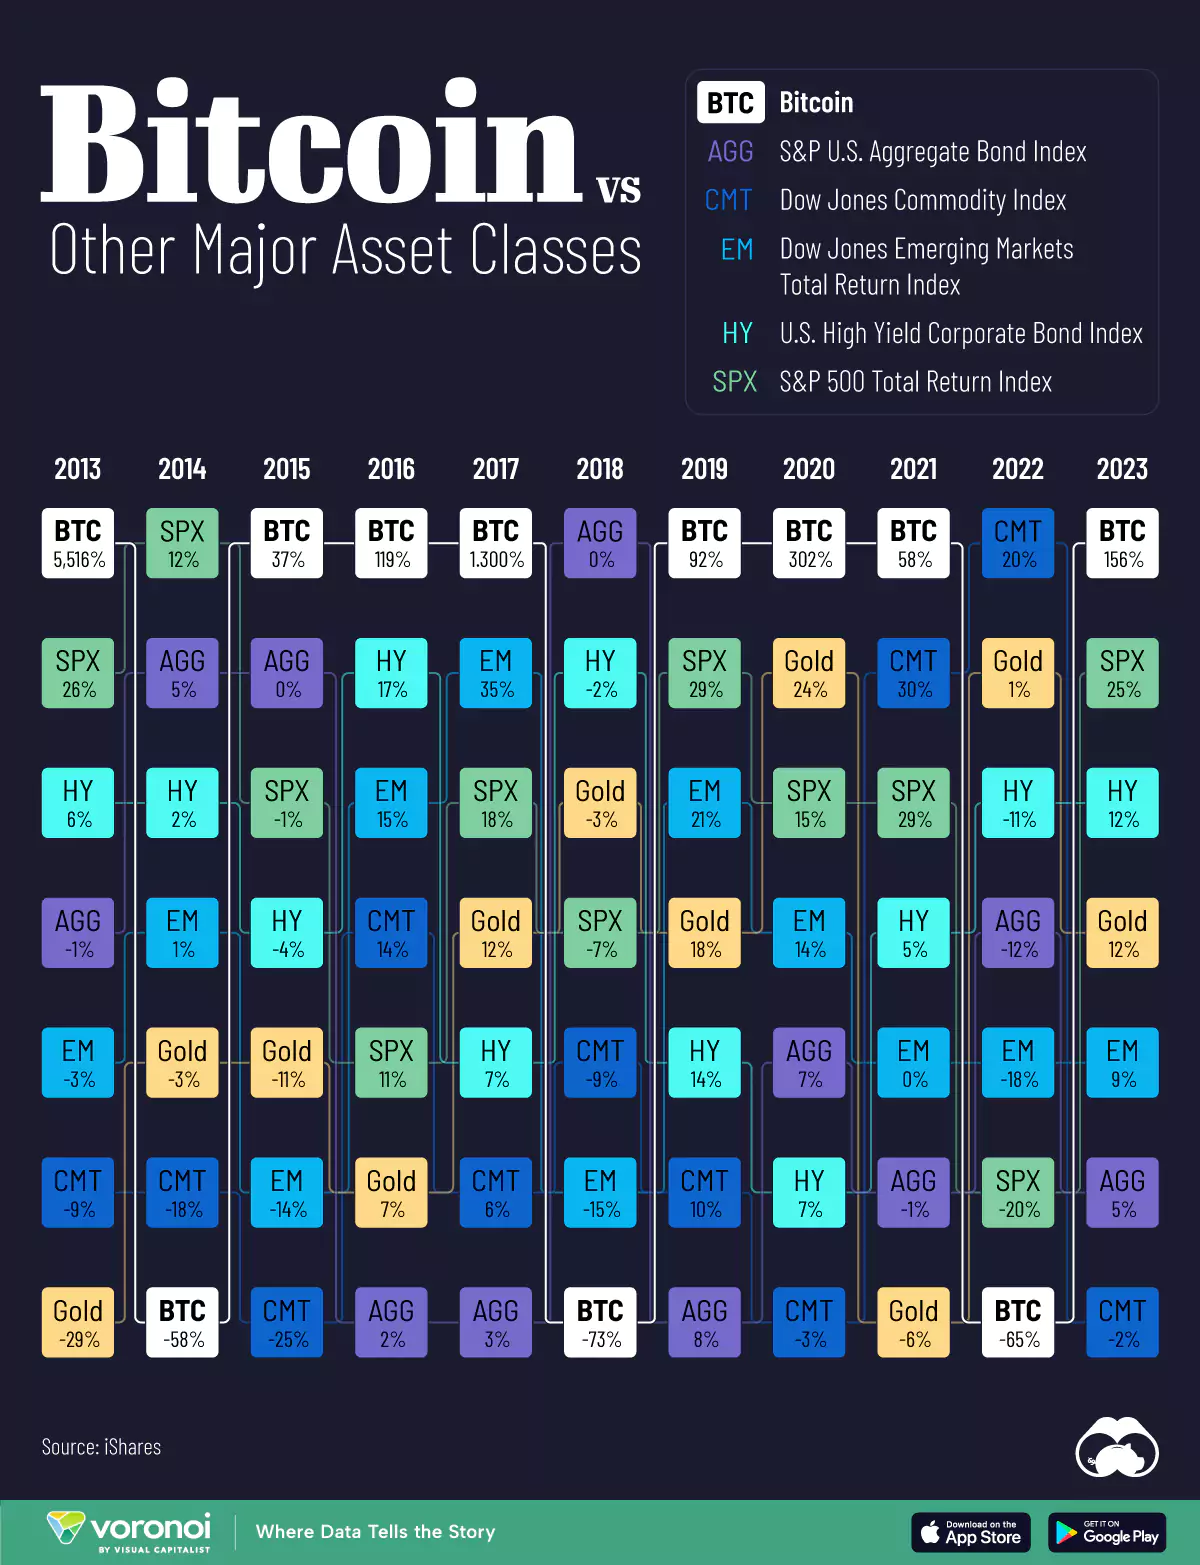 Bitcoin vs. other asset classes